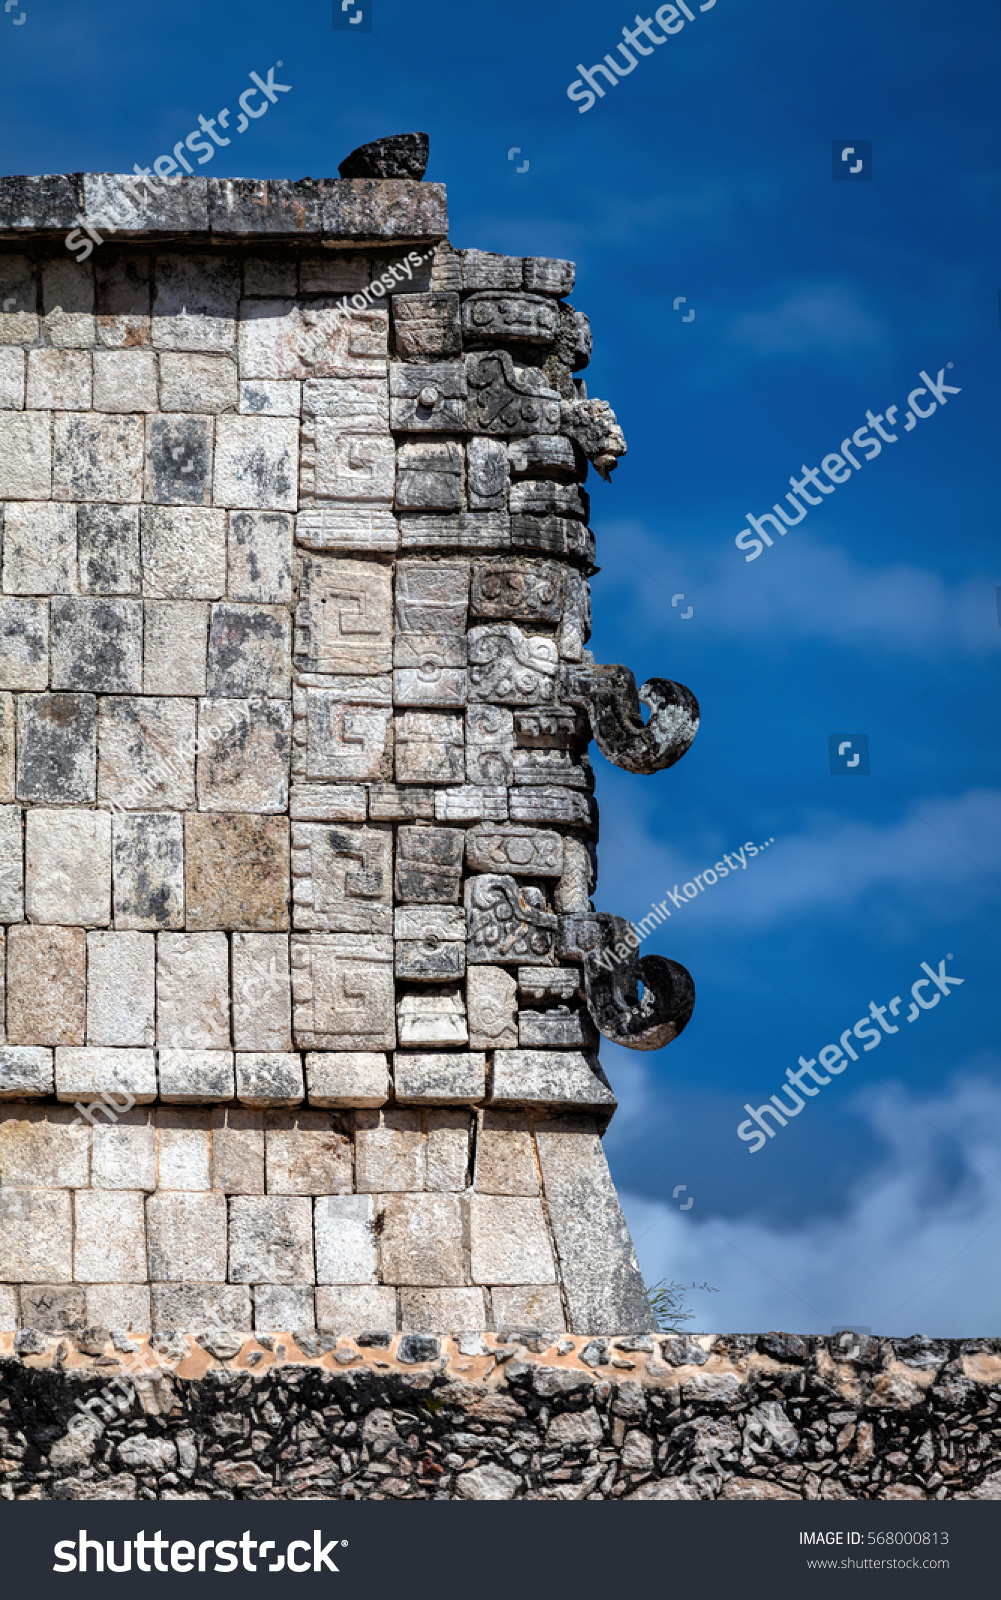 Three-dimensional masks at the corner of the Thousand Warriors temple in Chichen Itza, believed to be the Ancient Mayan god of rain and lightning Chac. #568000813